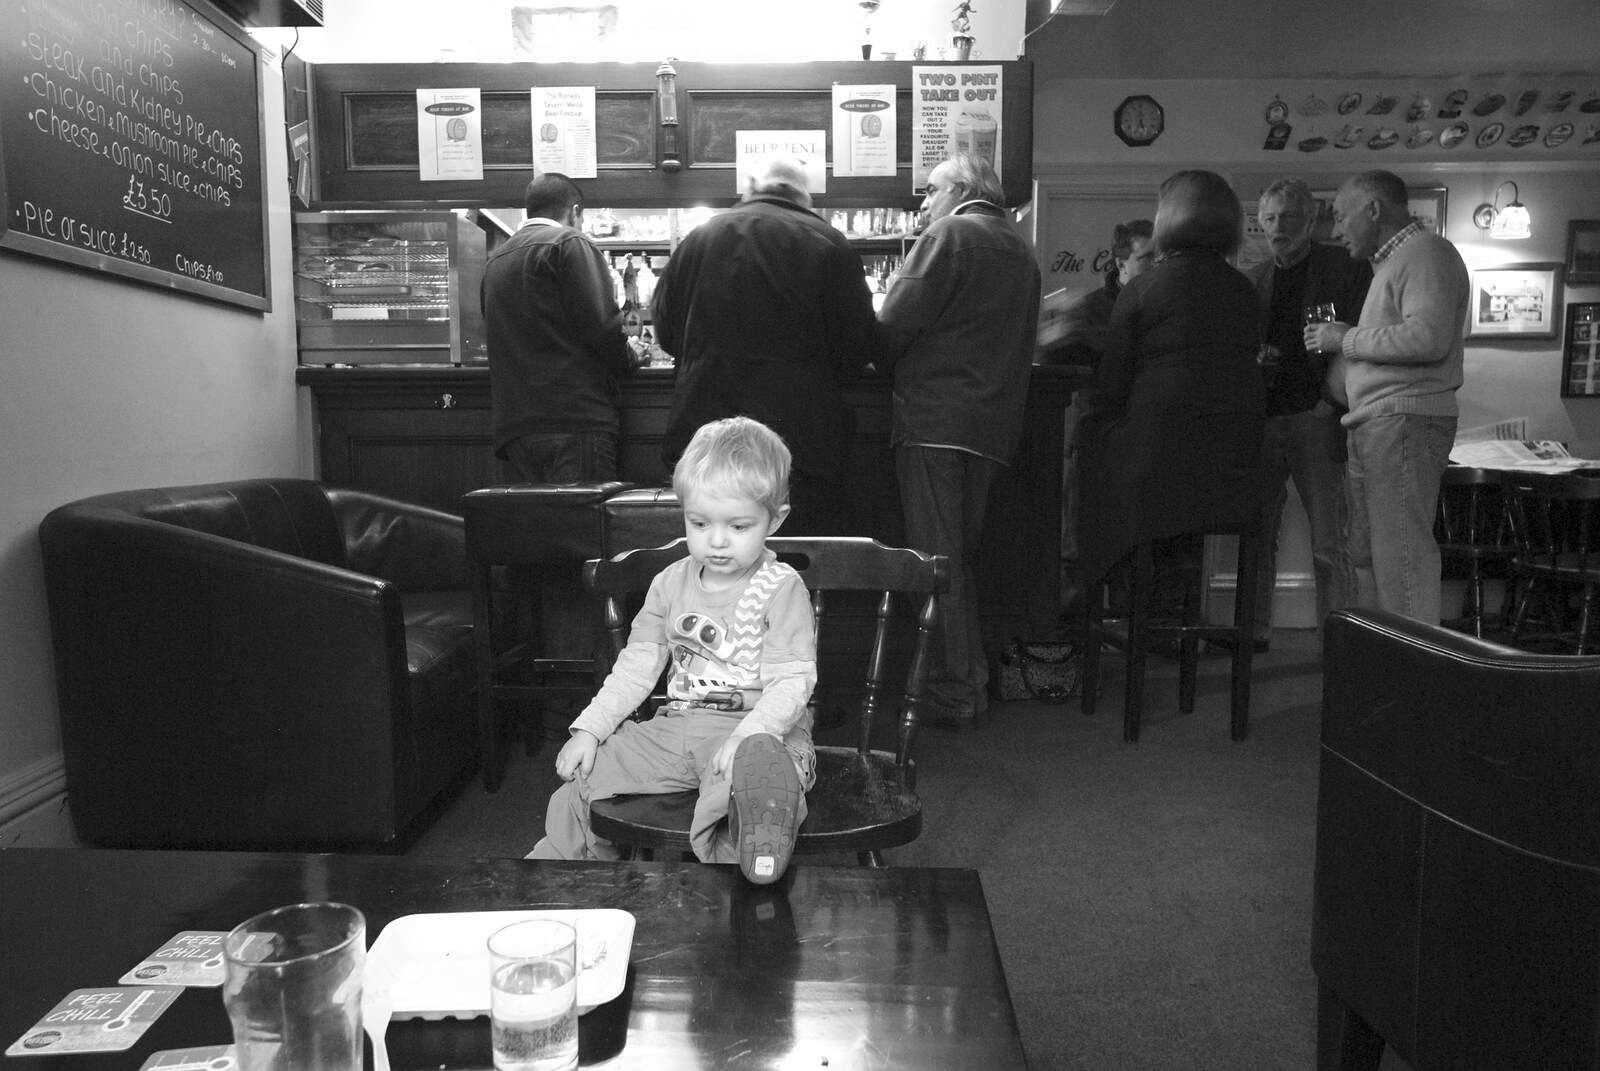 Fred in the bar from Gemma Leaves, The Mellis Railway and Taptu Moves Desks, Cambridge - 24th October 2010